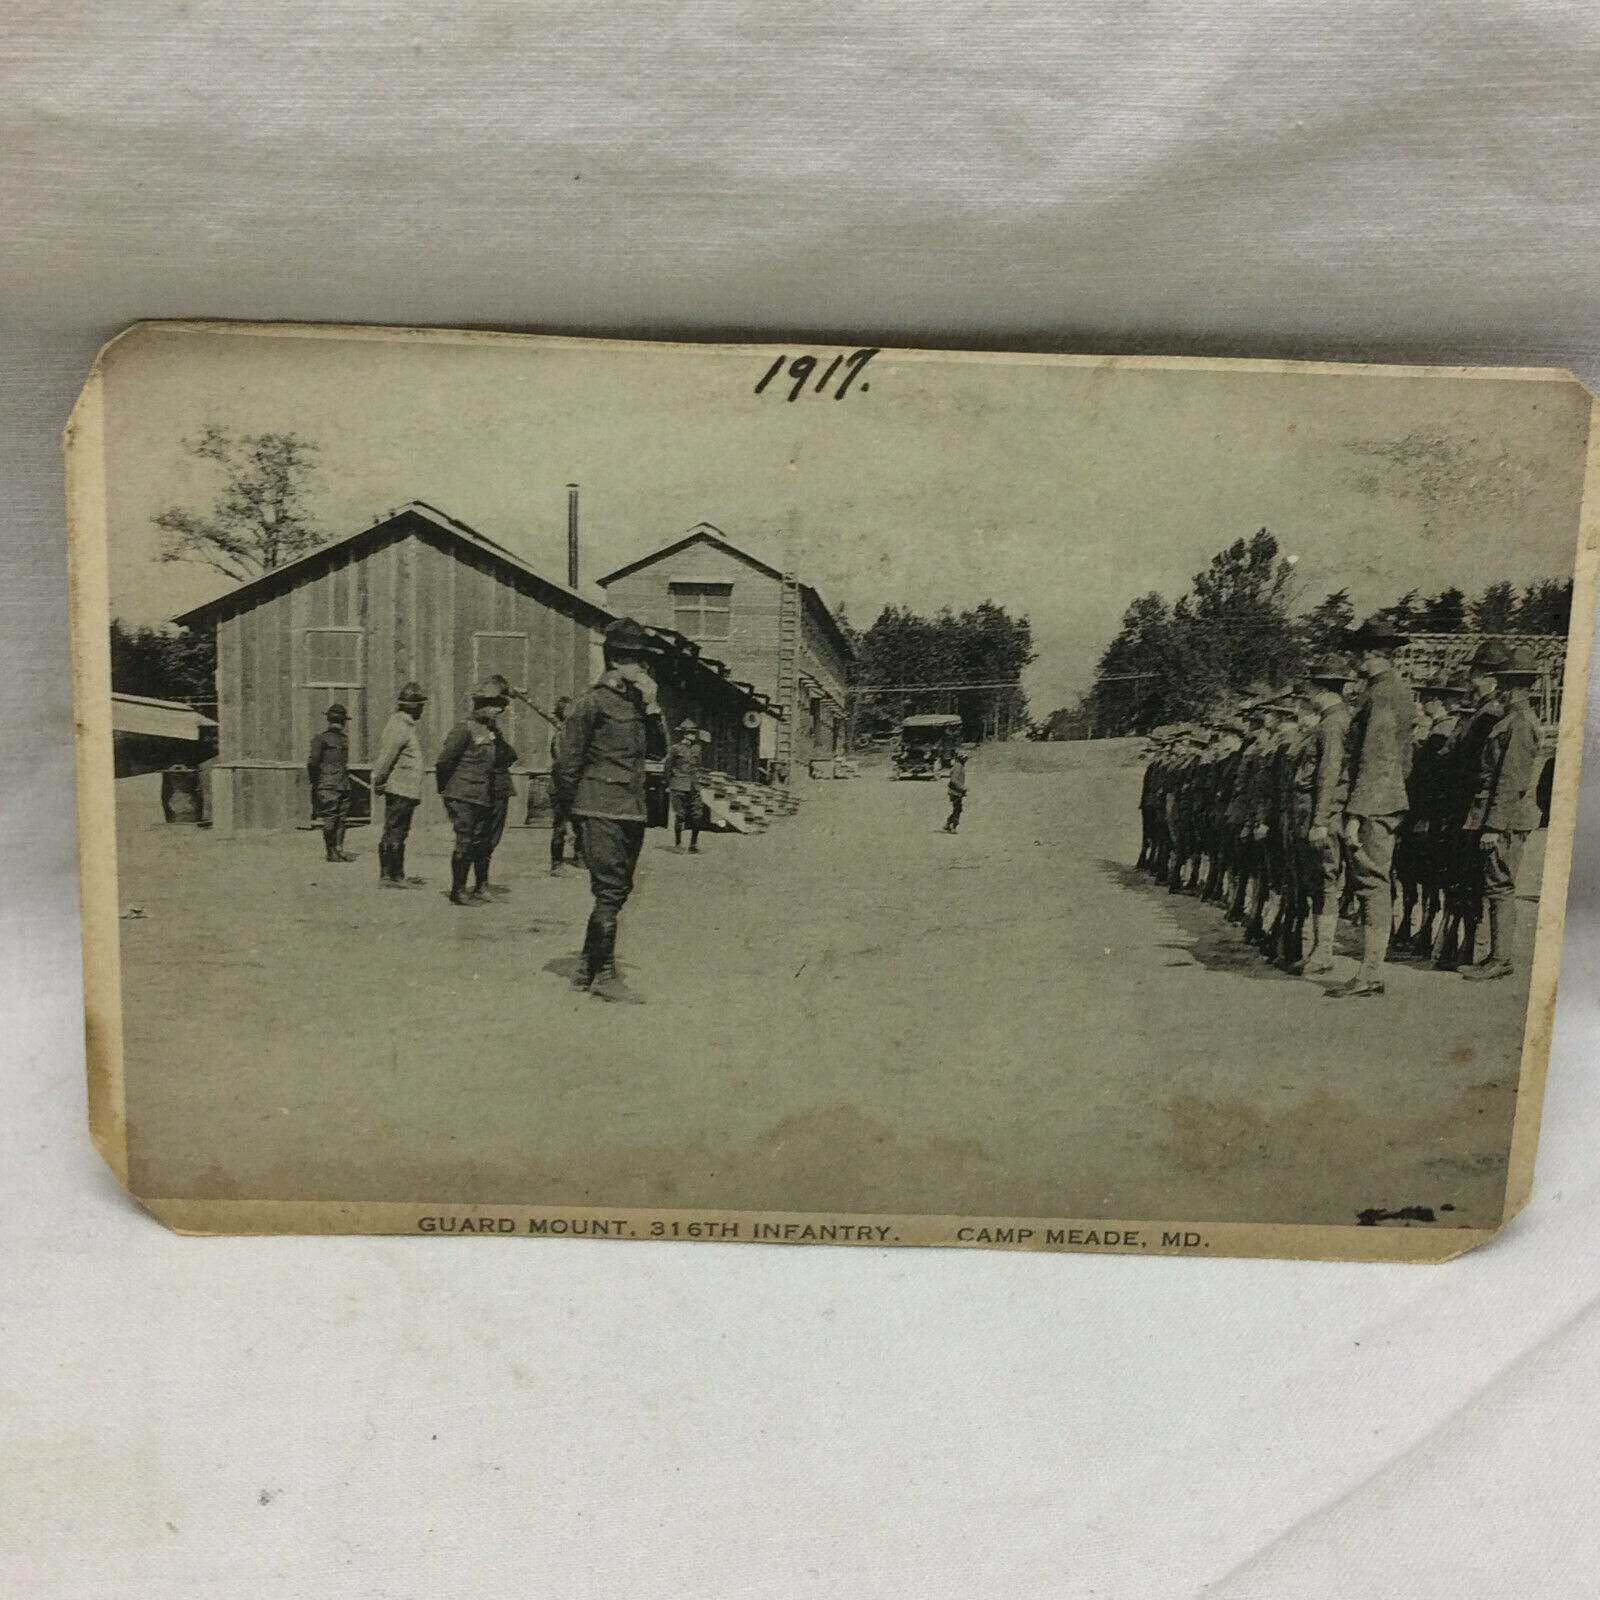 Vintage Postcard 1917 316th Army Infantry Guard Mount Camp Meade Scene